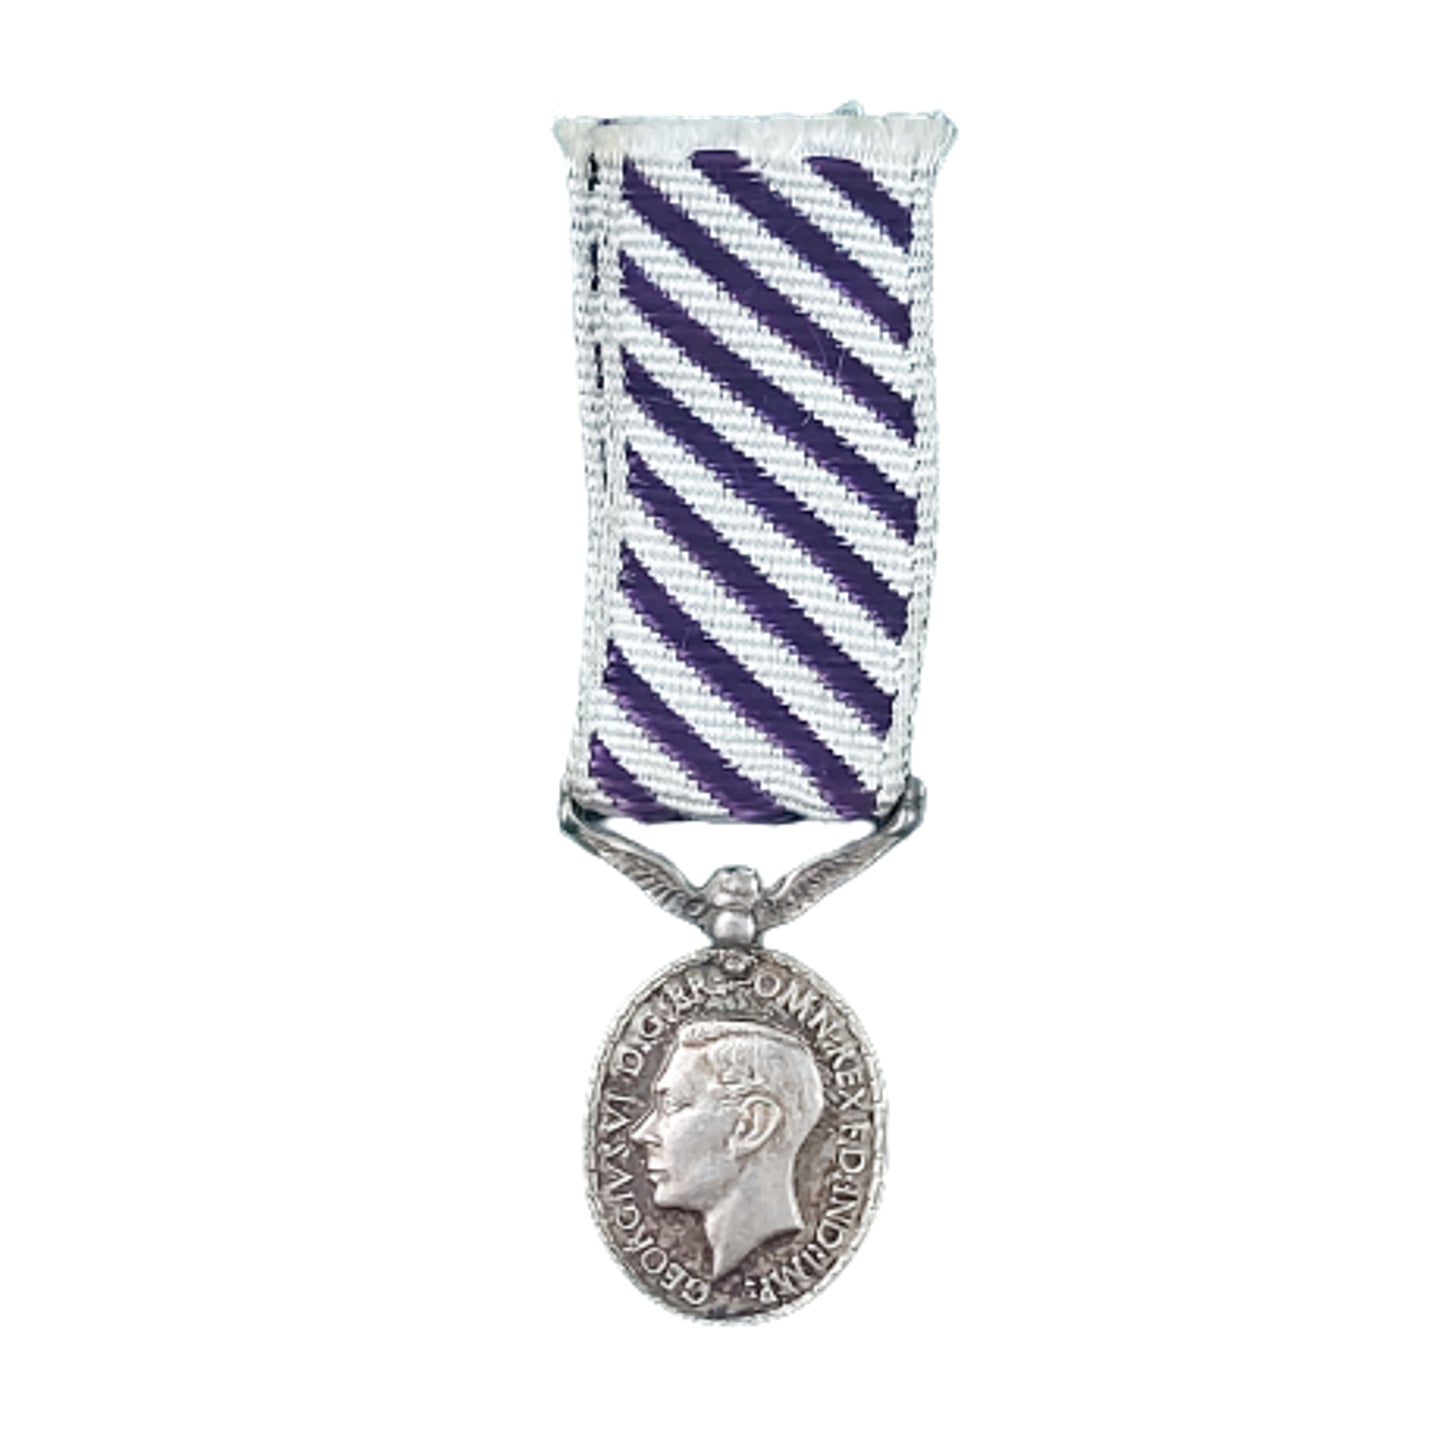 Miniature WW1 Distinguished Flying Medal